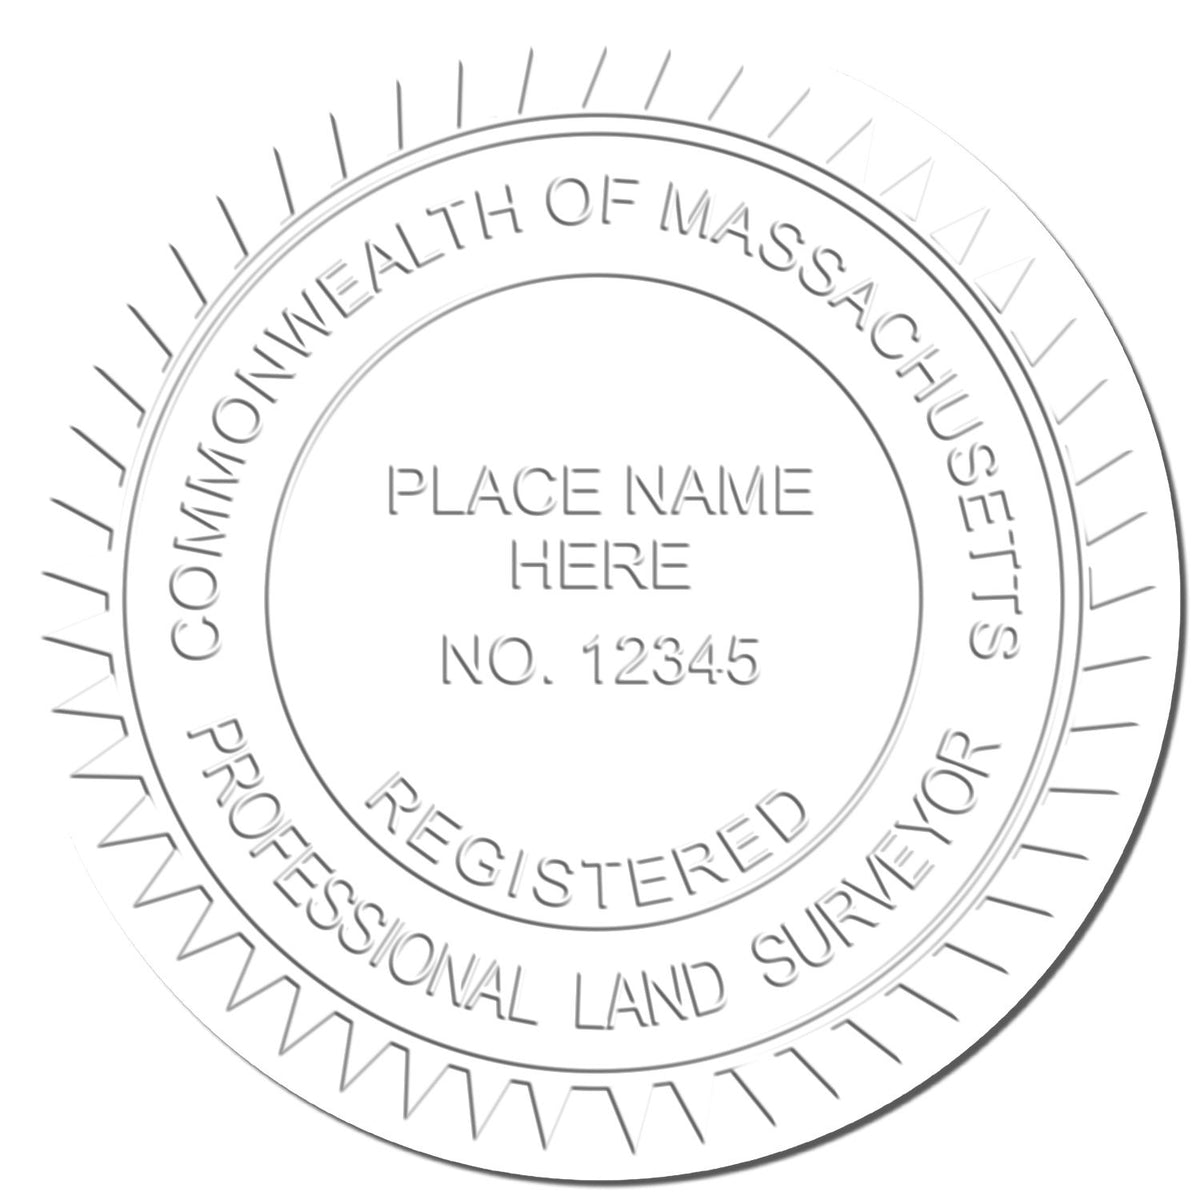 This paper is stamped with a sample imprint of the Long Reach Massachusetts Land Surveyor Seal, signifying its quality and reliability.